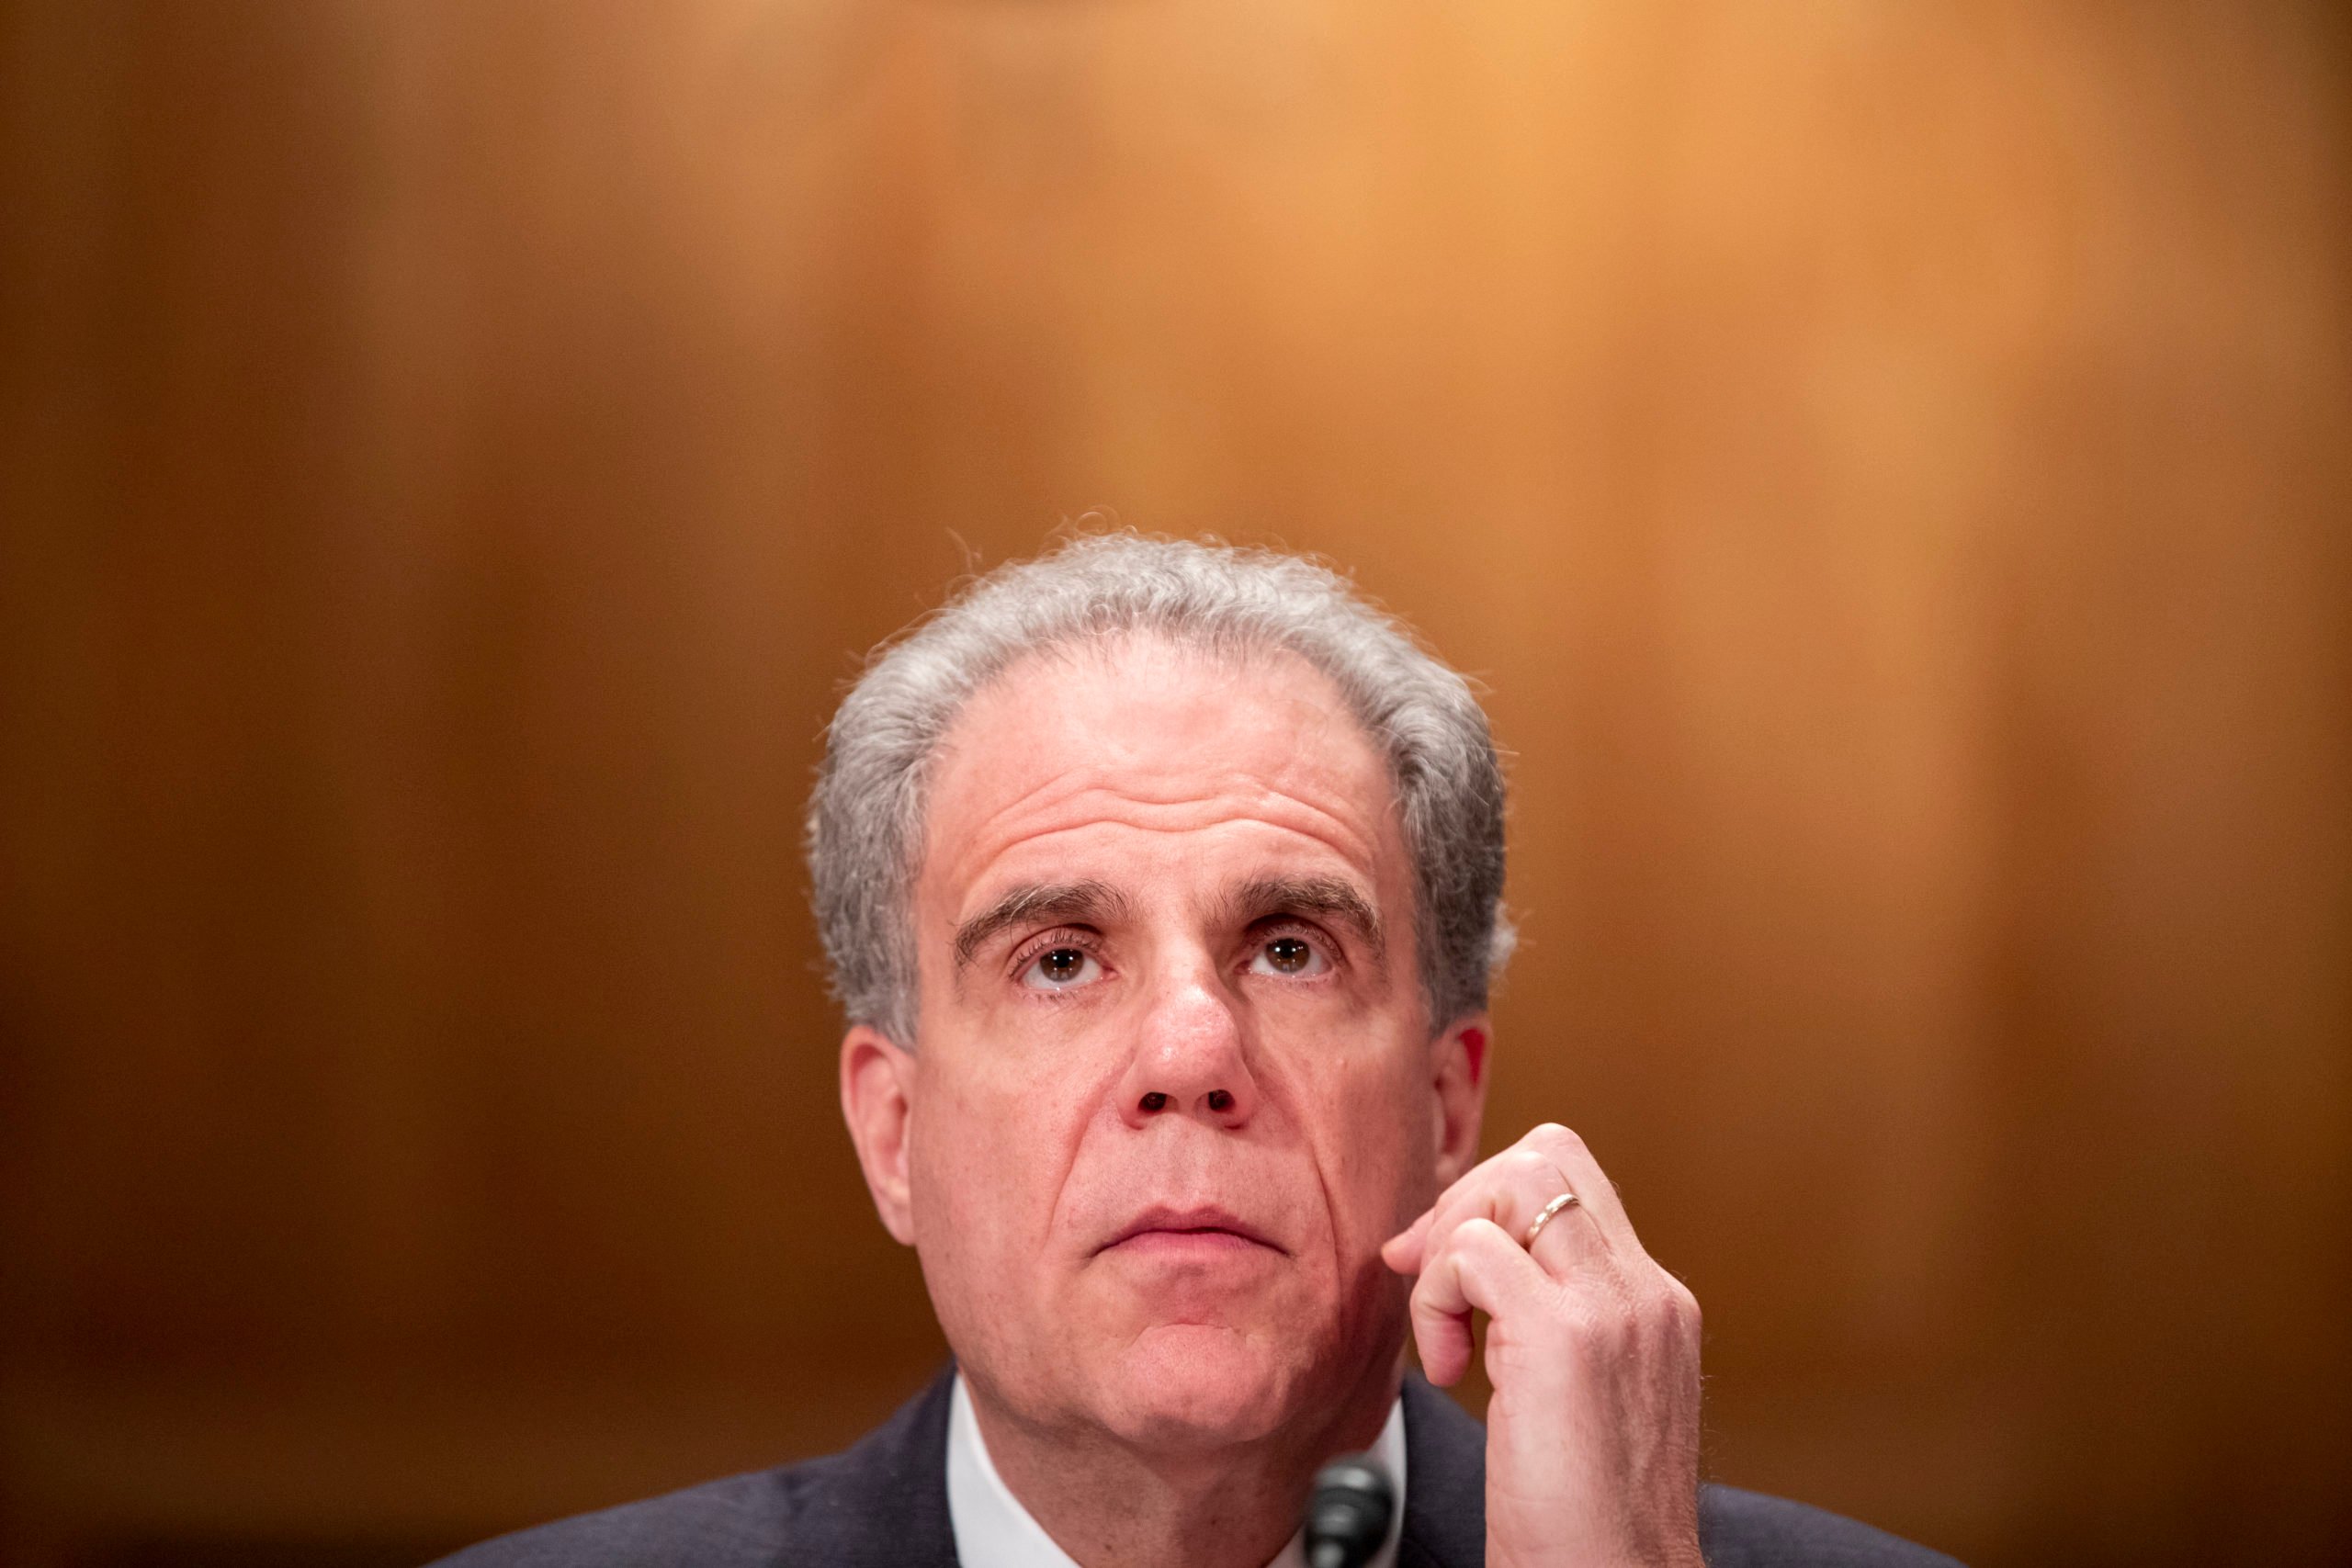 WASHINGTON, DC - DECEMBER 18: Department of Justice Inspector General Michael Horowitz testifies before the Senate Committee On Homeland Security And Governmental Affairs during a hearing at the US Capitol on December 18, 2019 in Washington, DC. Last week the Inspector General released a report on the origins of the FBI's investigation into the Trump campaign's possible ties with Russia during the 2016 Presidential elections. (Photo by Samuel Corum/Getty Images)